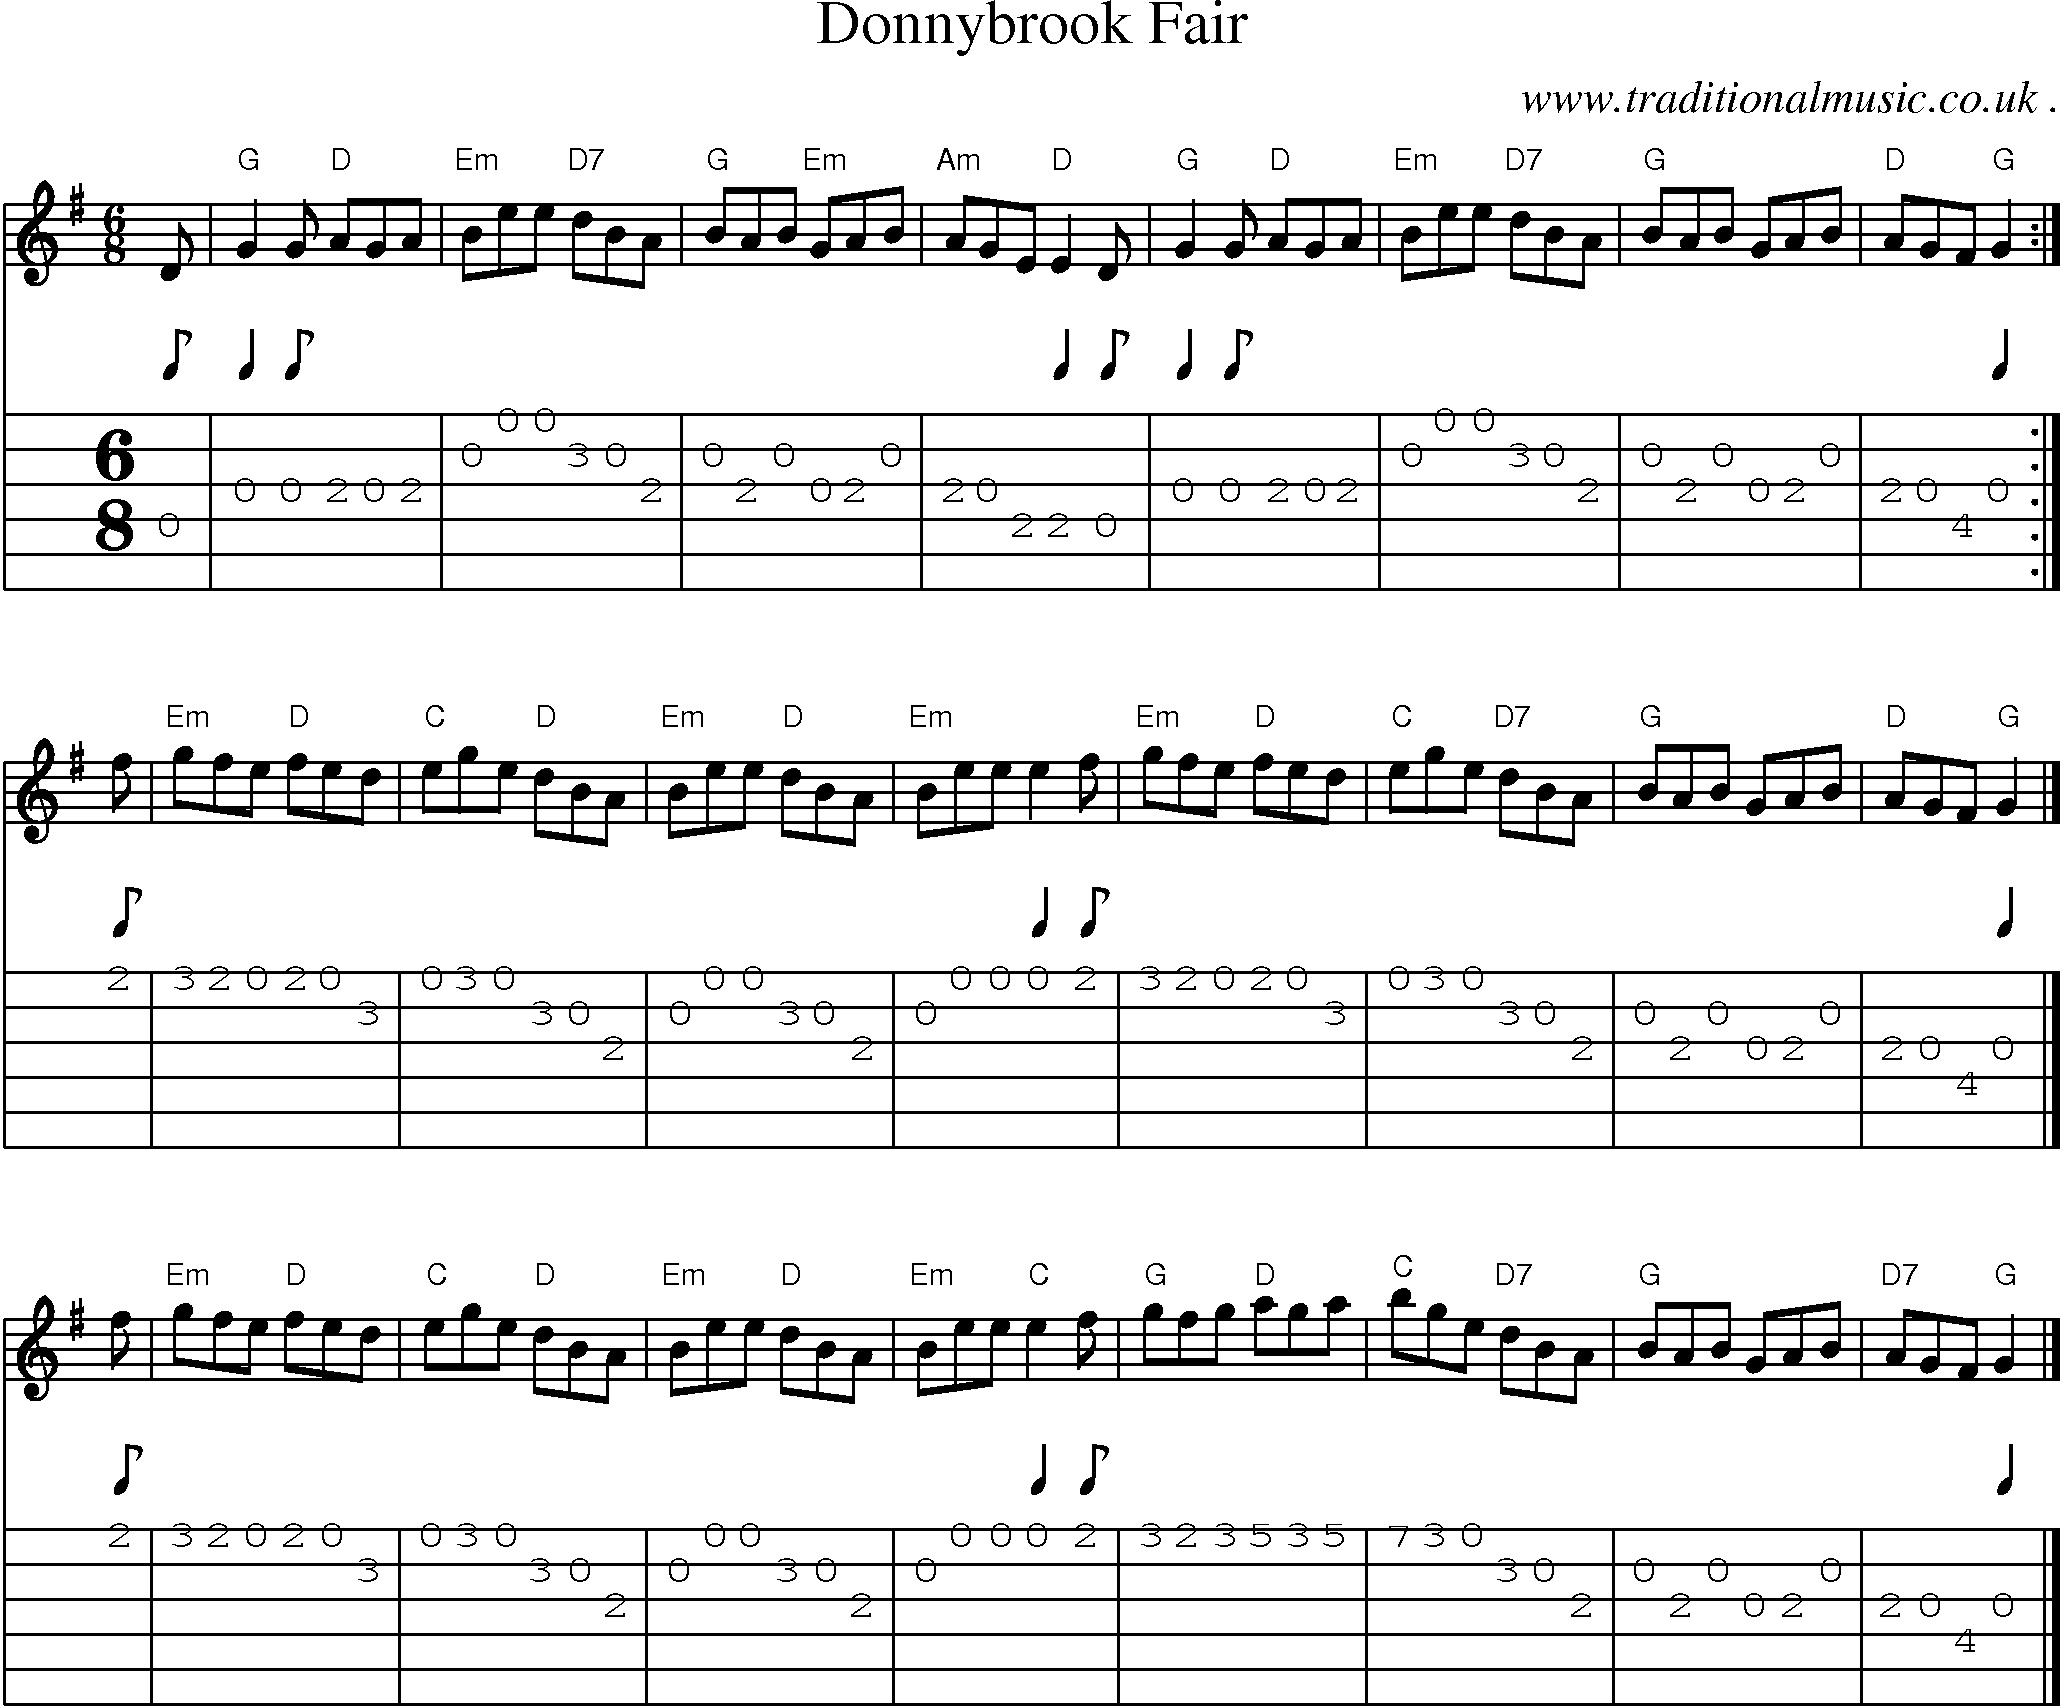 Sheet-music  score, Chords and Guitar Tabs for Donnybrook Fair